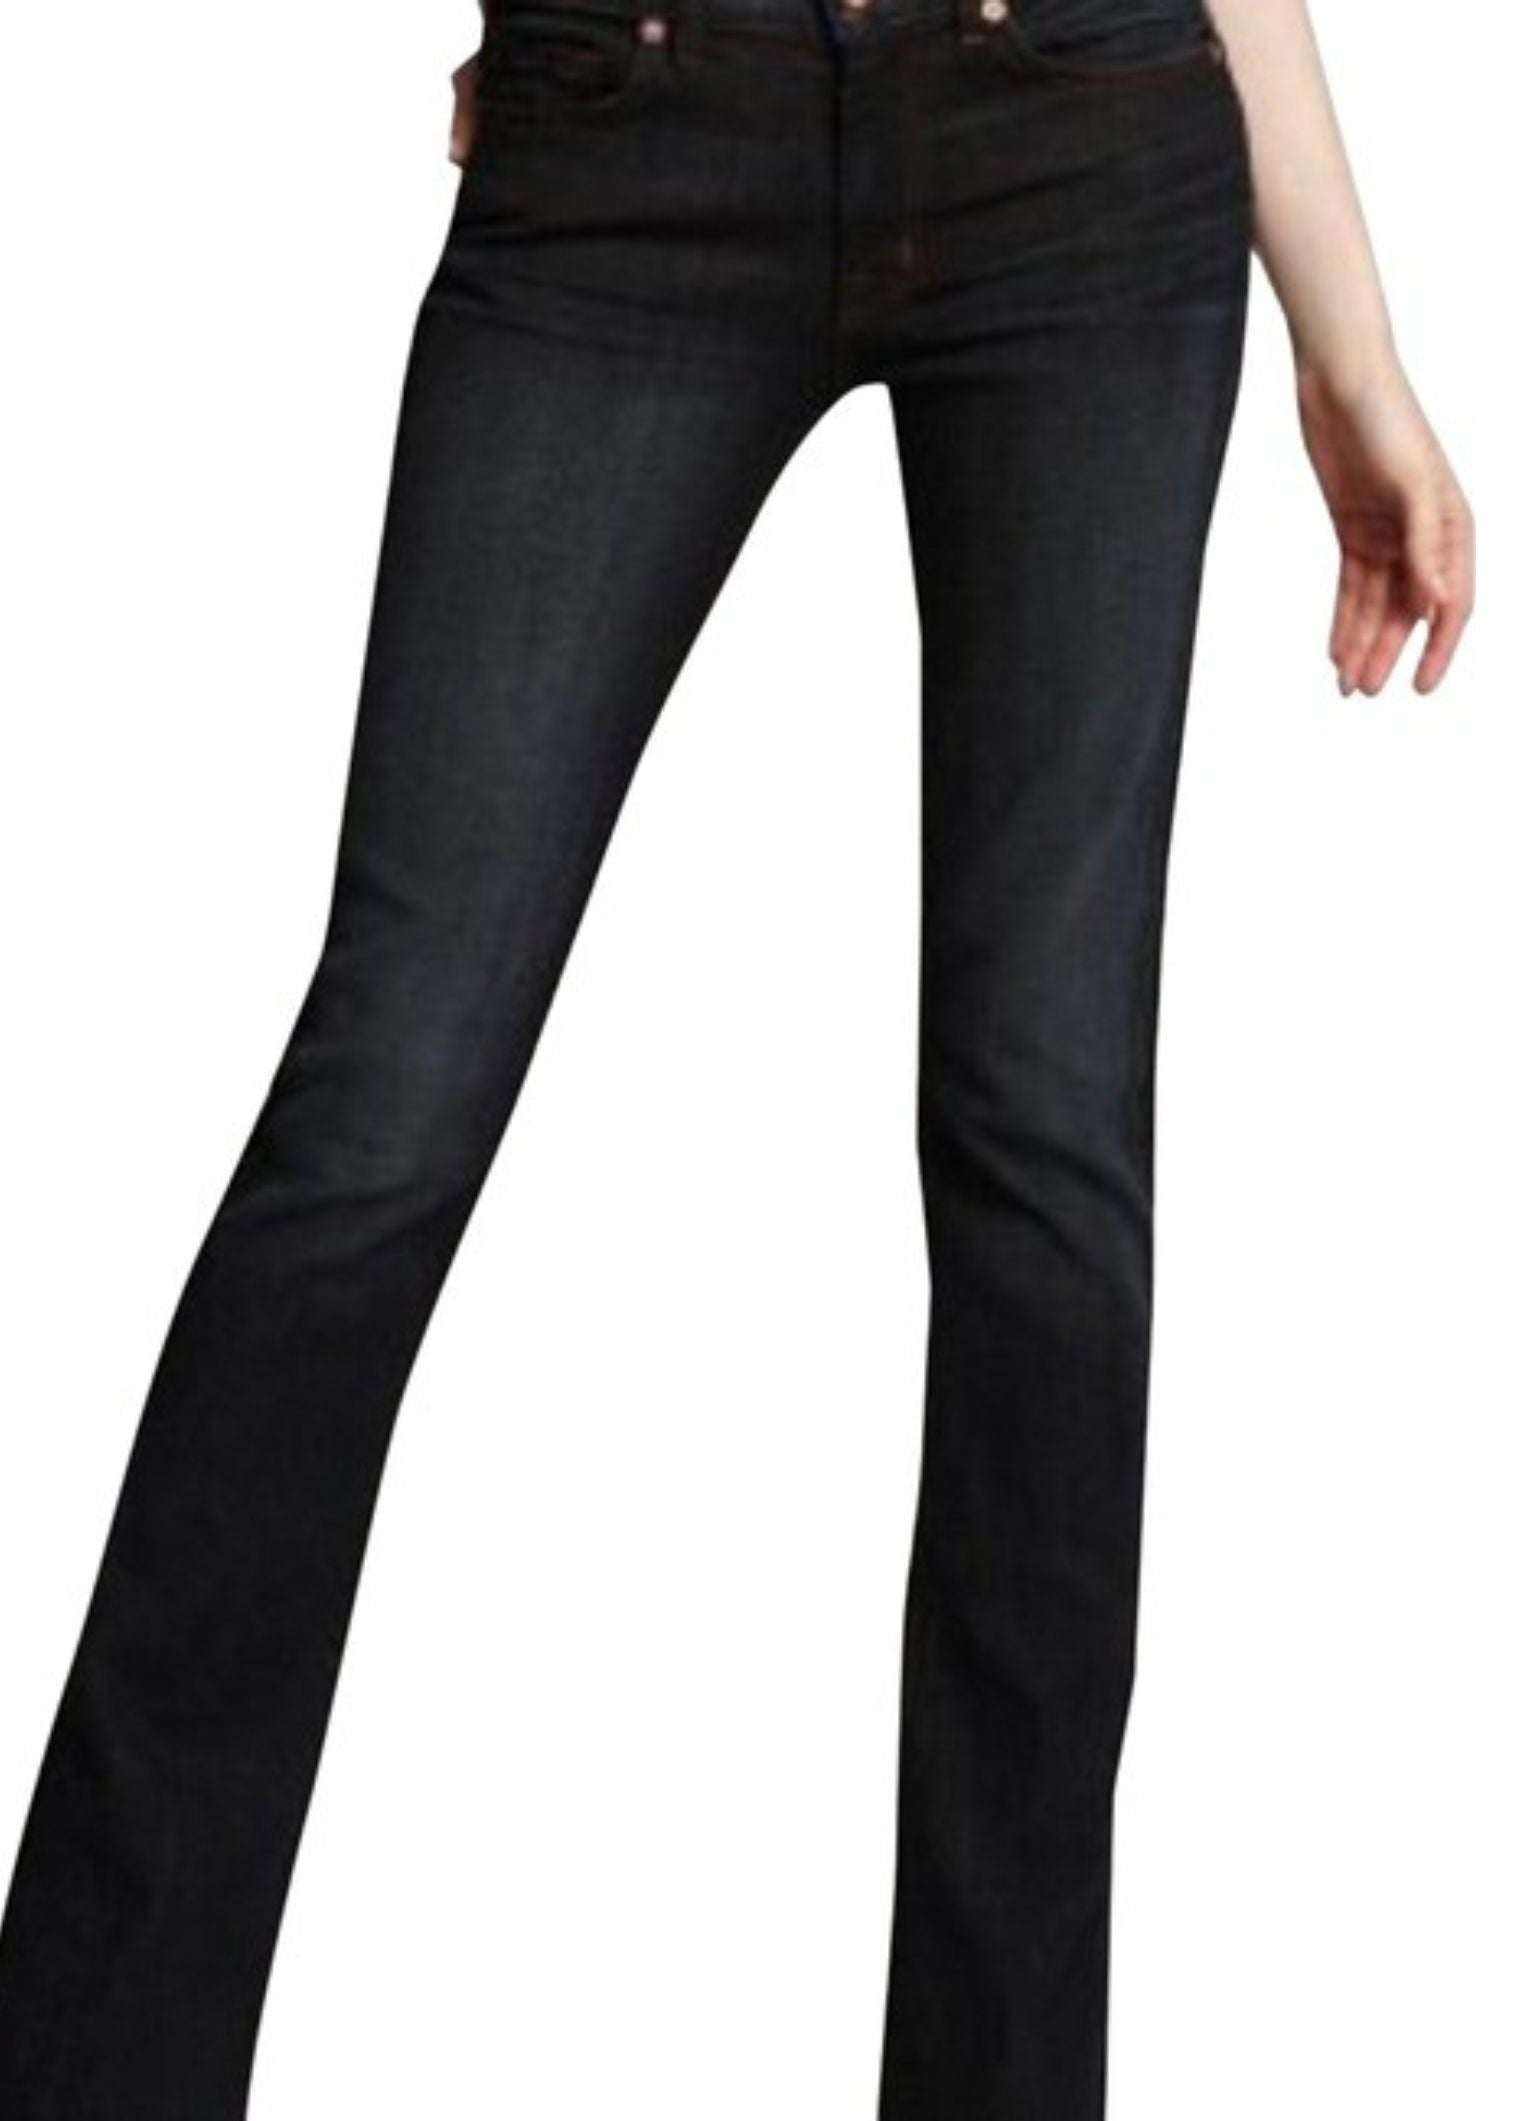 J Brand Enchanted Jeans - Second Chance